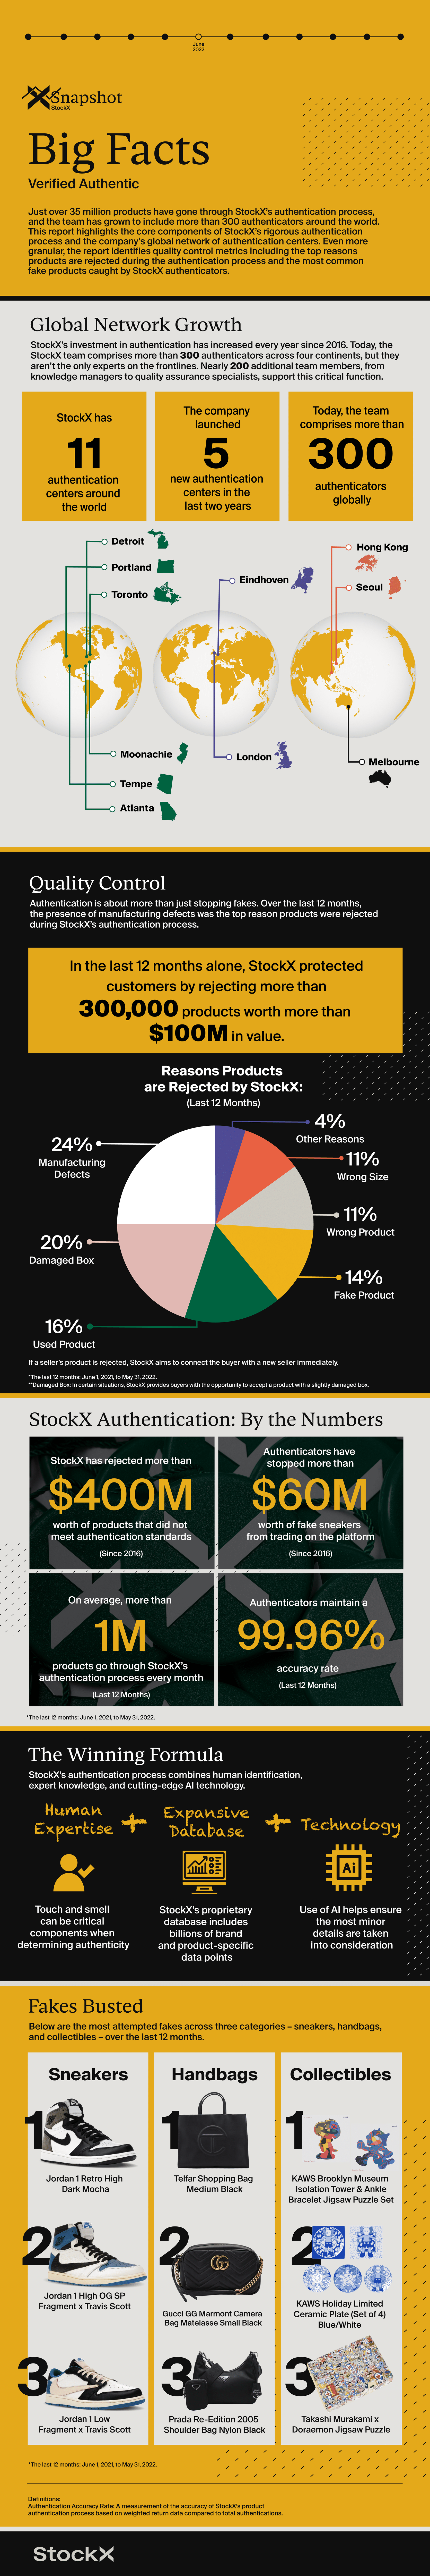 By The Numbers: Off-White Data Recap - StockX News